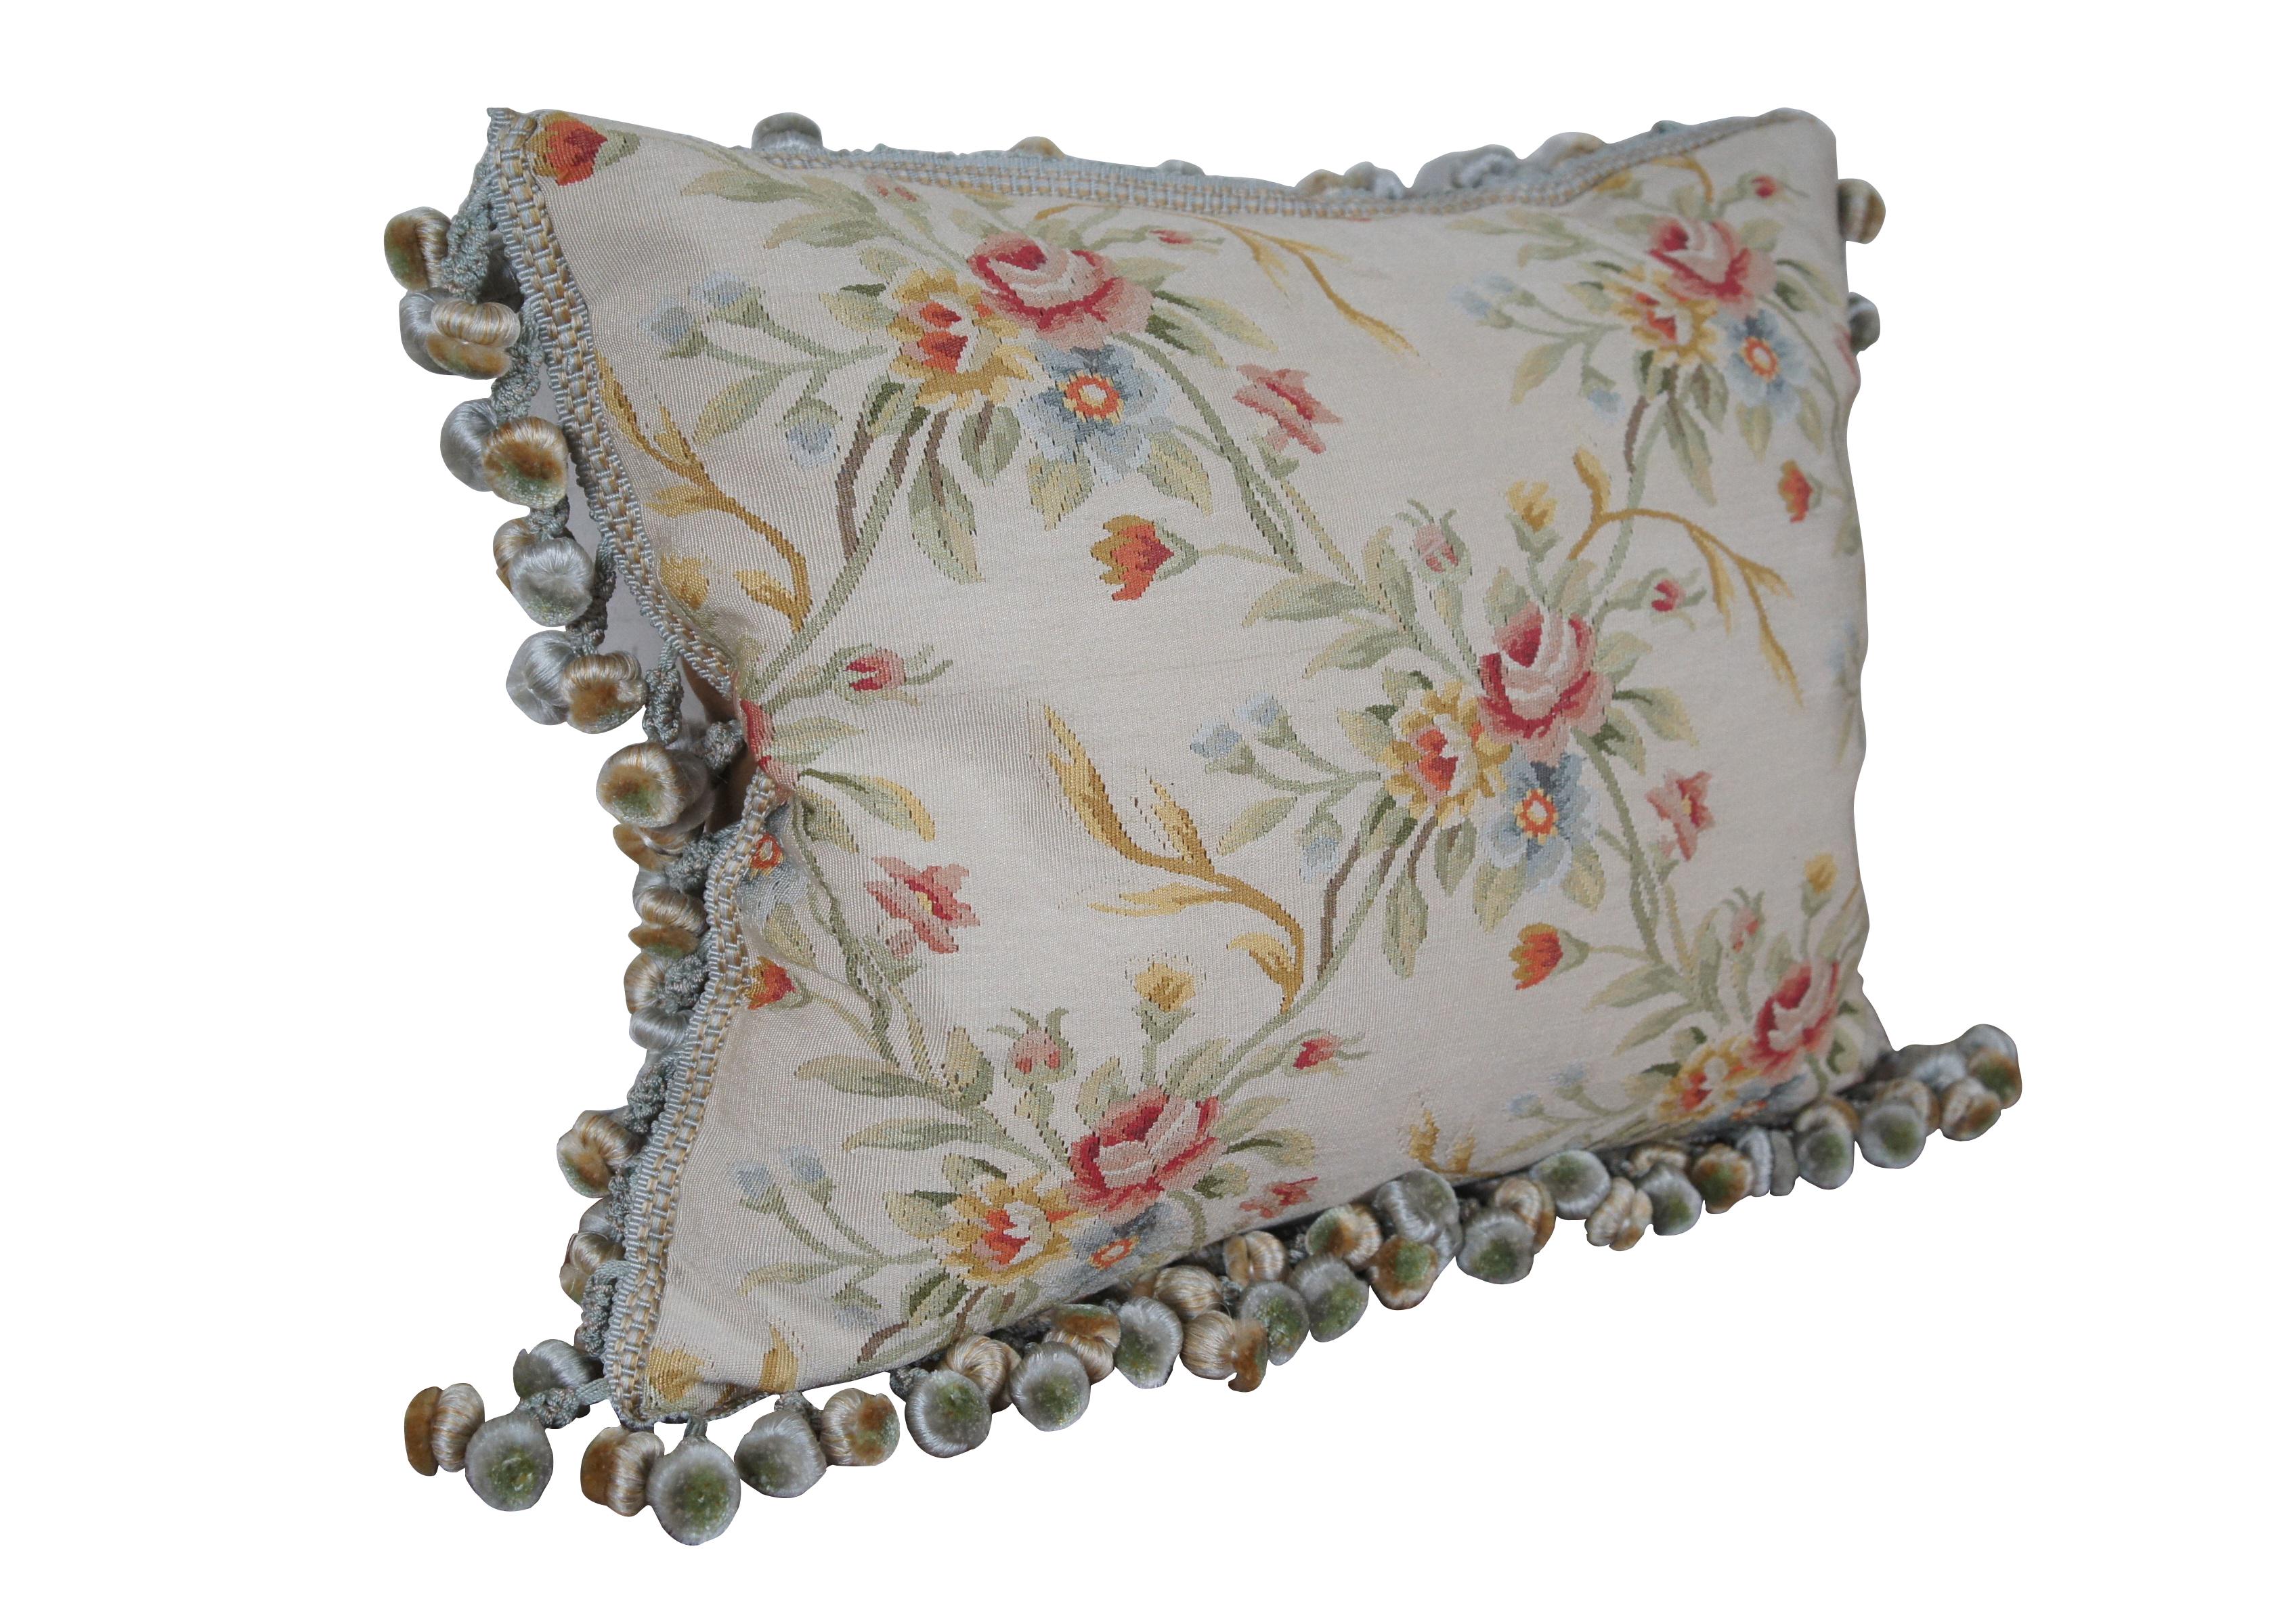 20th century rectangular lumbar / throw pillow,  embroidered in silk with bouquets of pink, yellow, blue and orange flowers, connected with green and yellow stems. Down filled. Light brown velour back with zipper closure. Blue and gold ball tassel